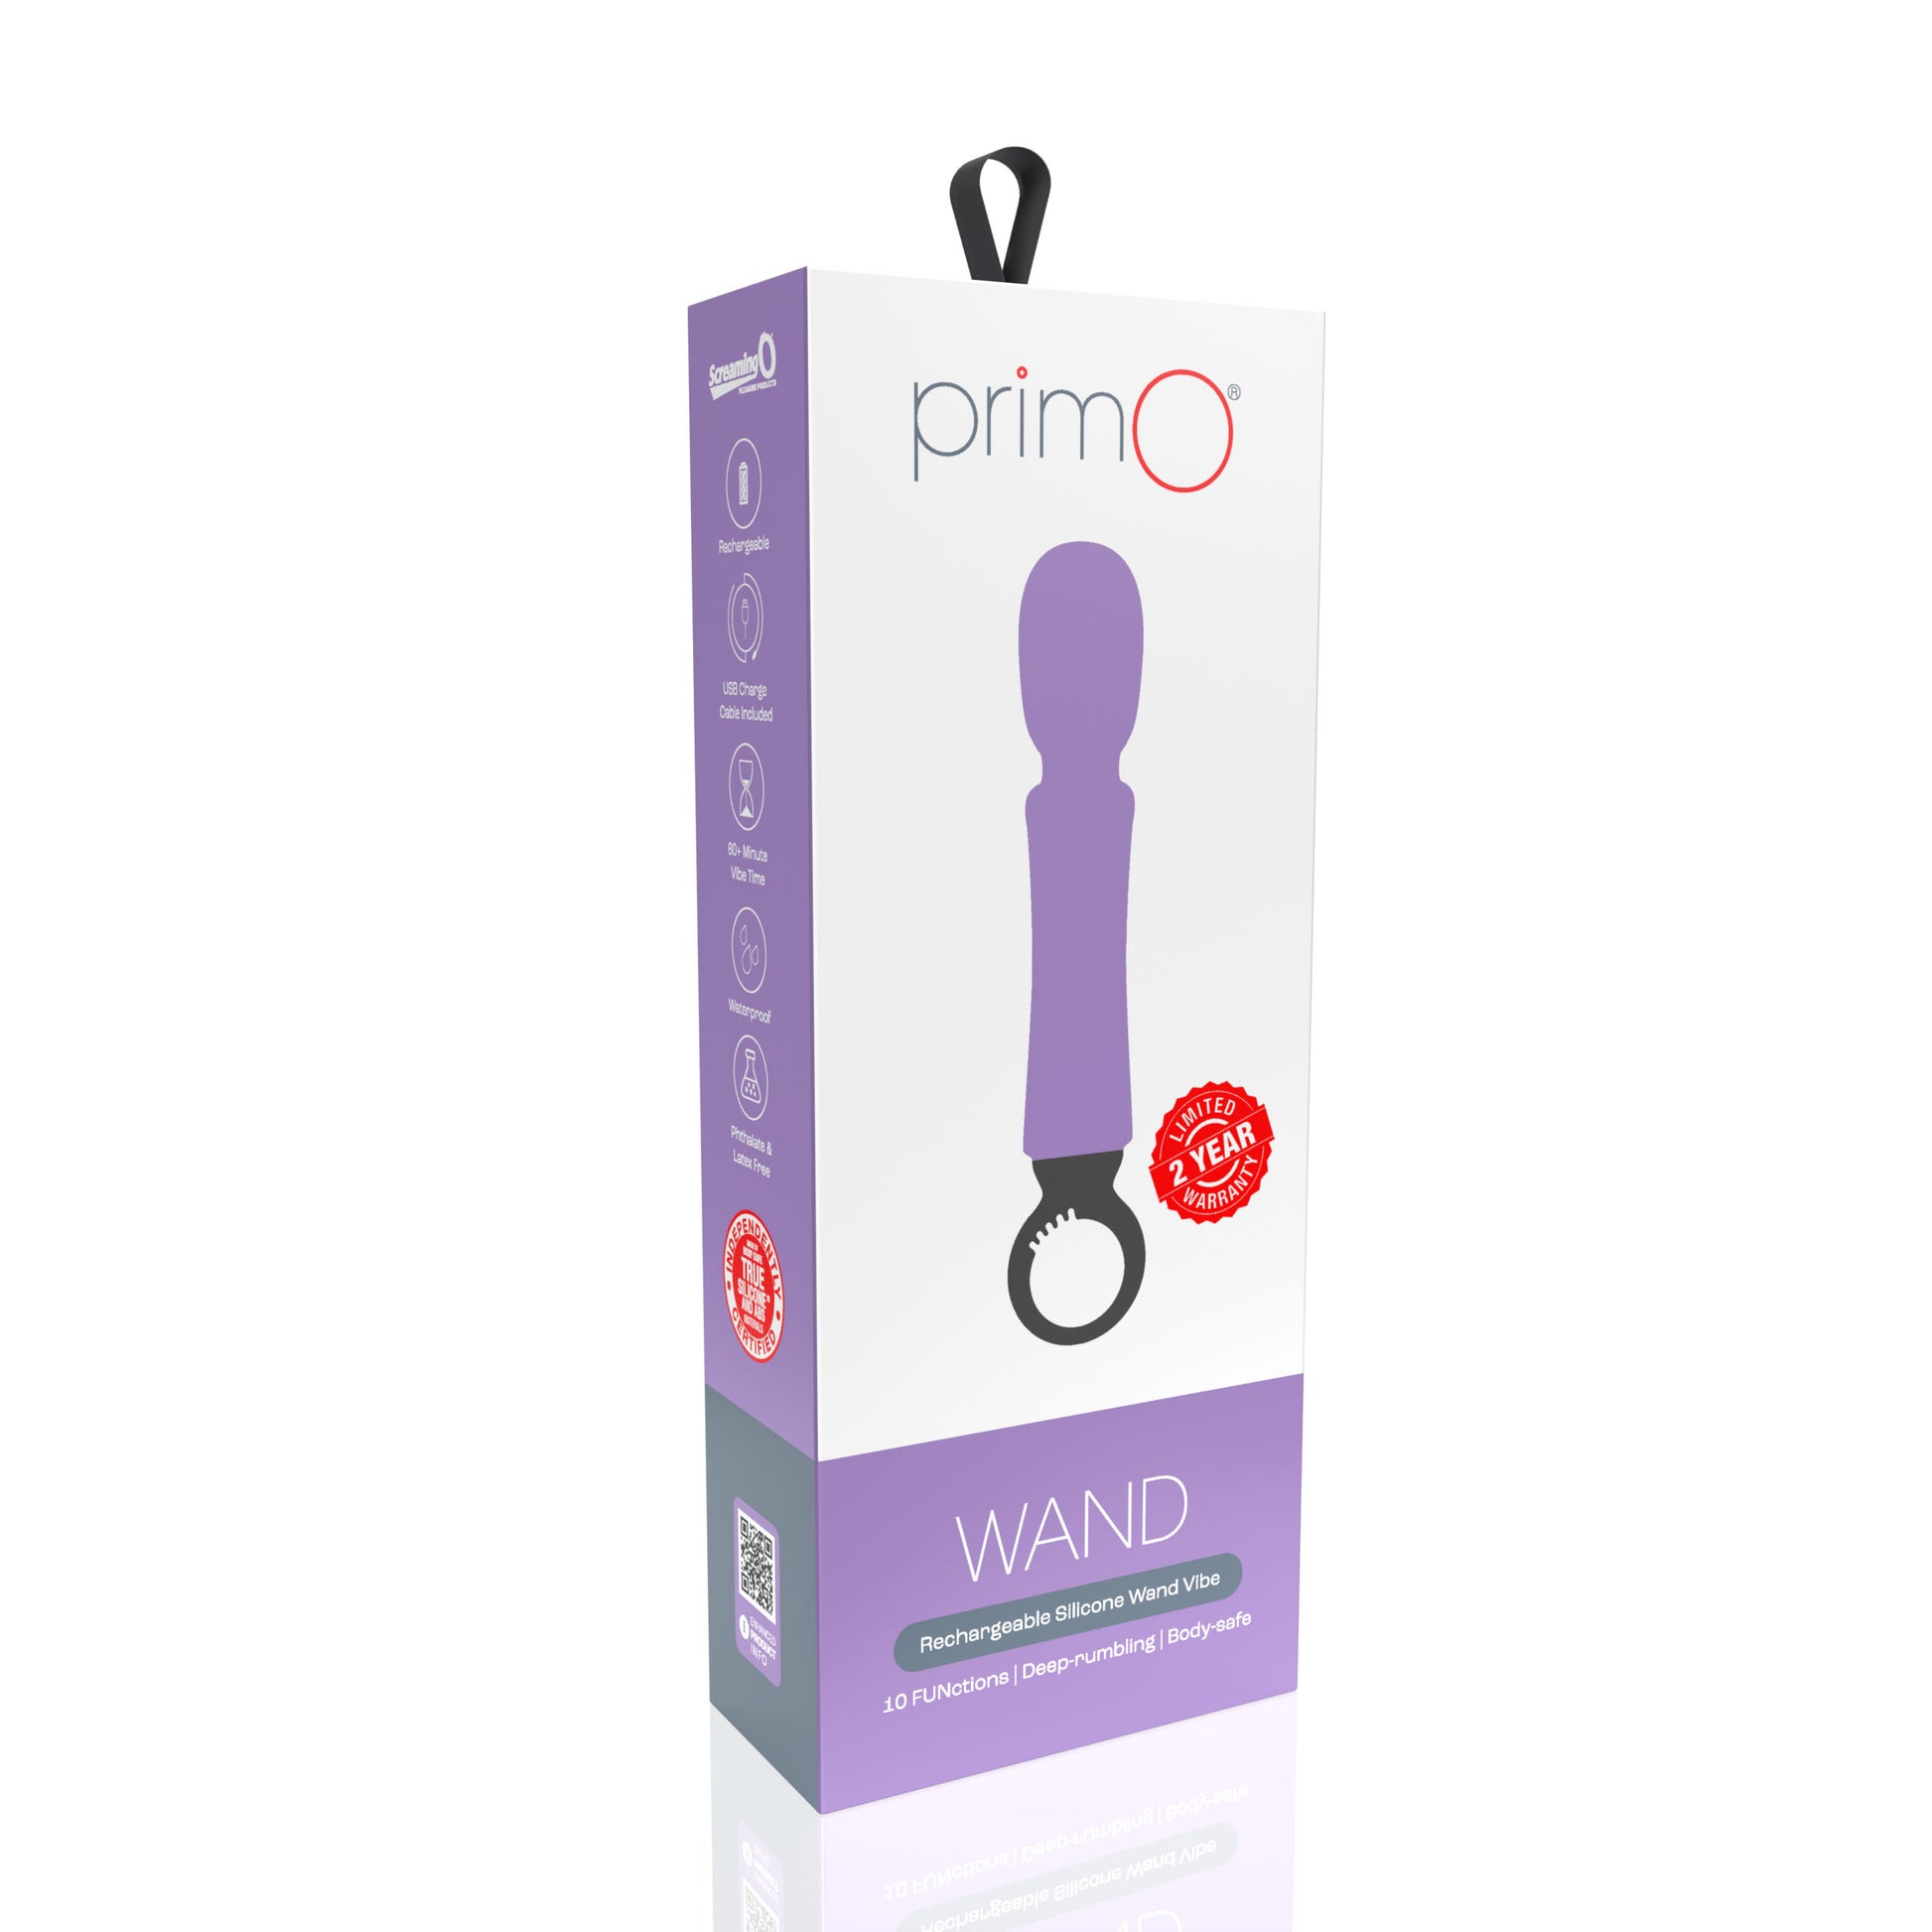 Primo Wand Rechargeable Vibe - Lilac